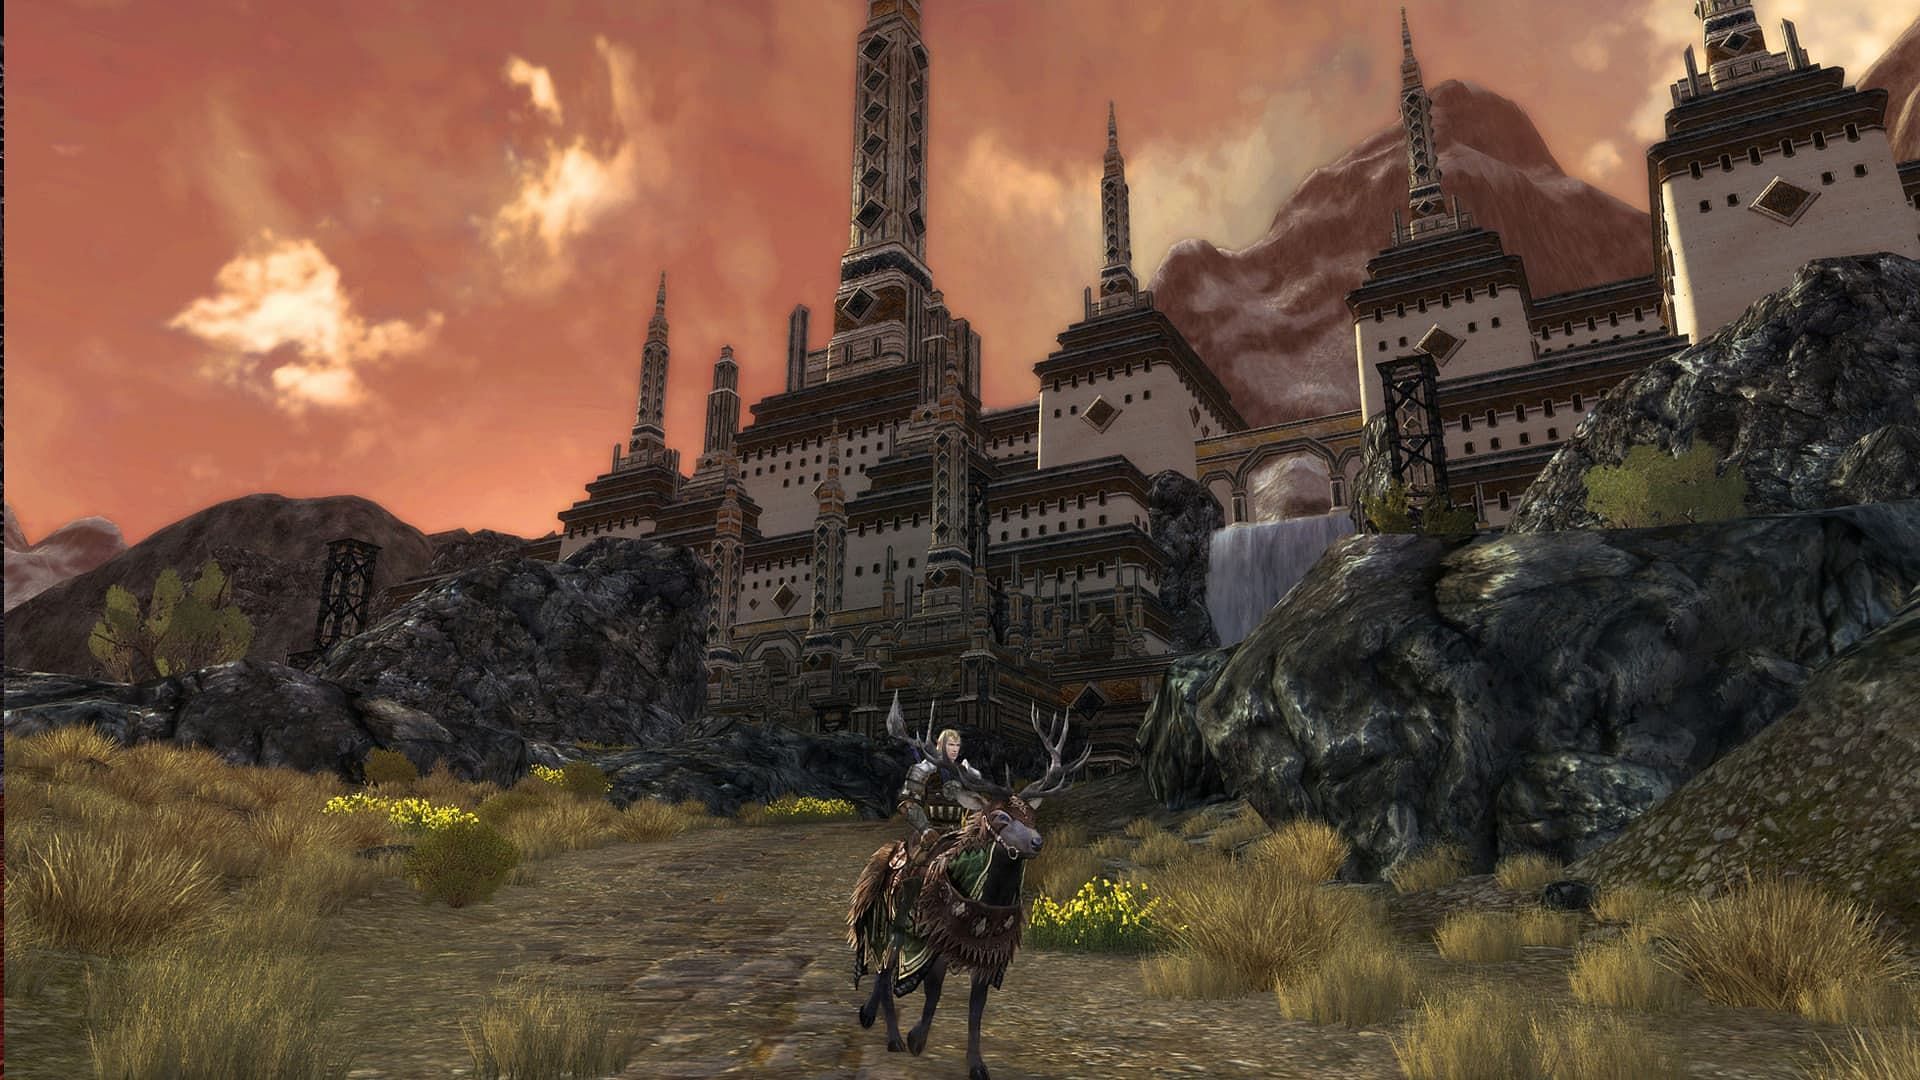 The immersive world of Lord of the Rings Online. (Image via Standing Stone Games)